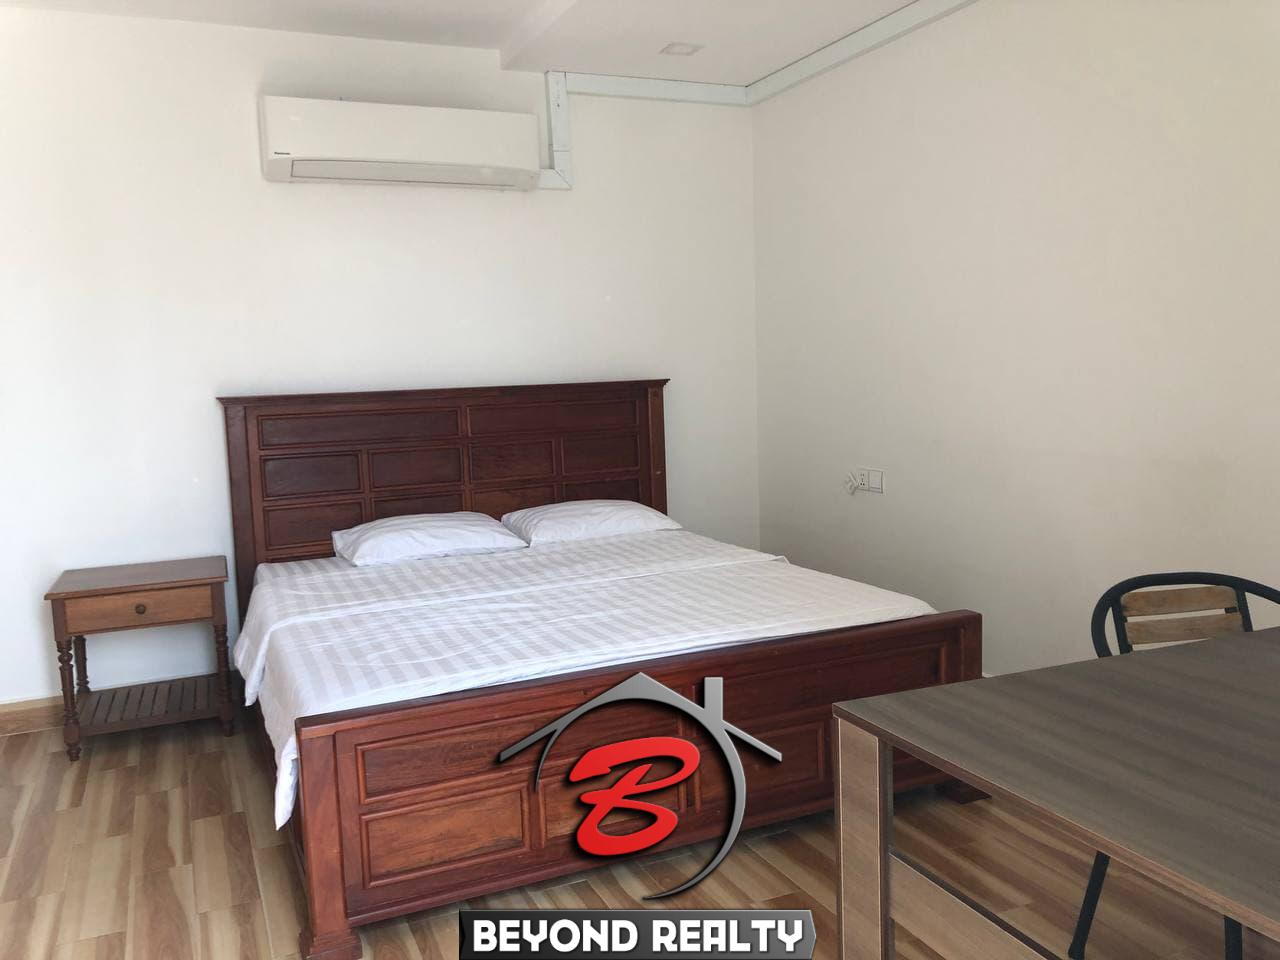 a bedroom of the 3-bedroom penthouse serviced apartment for rent in Tonle Bassac Phnom Penh Cambodia